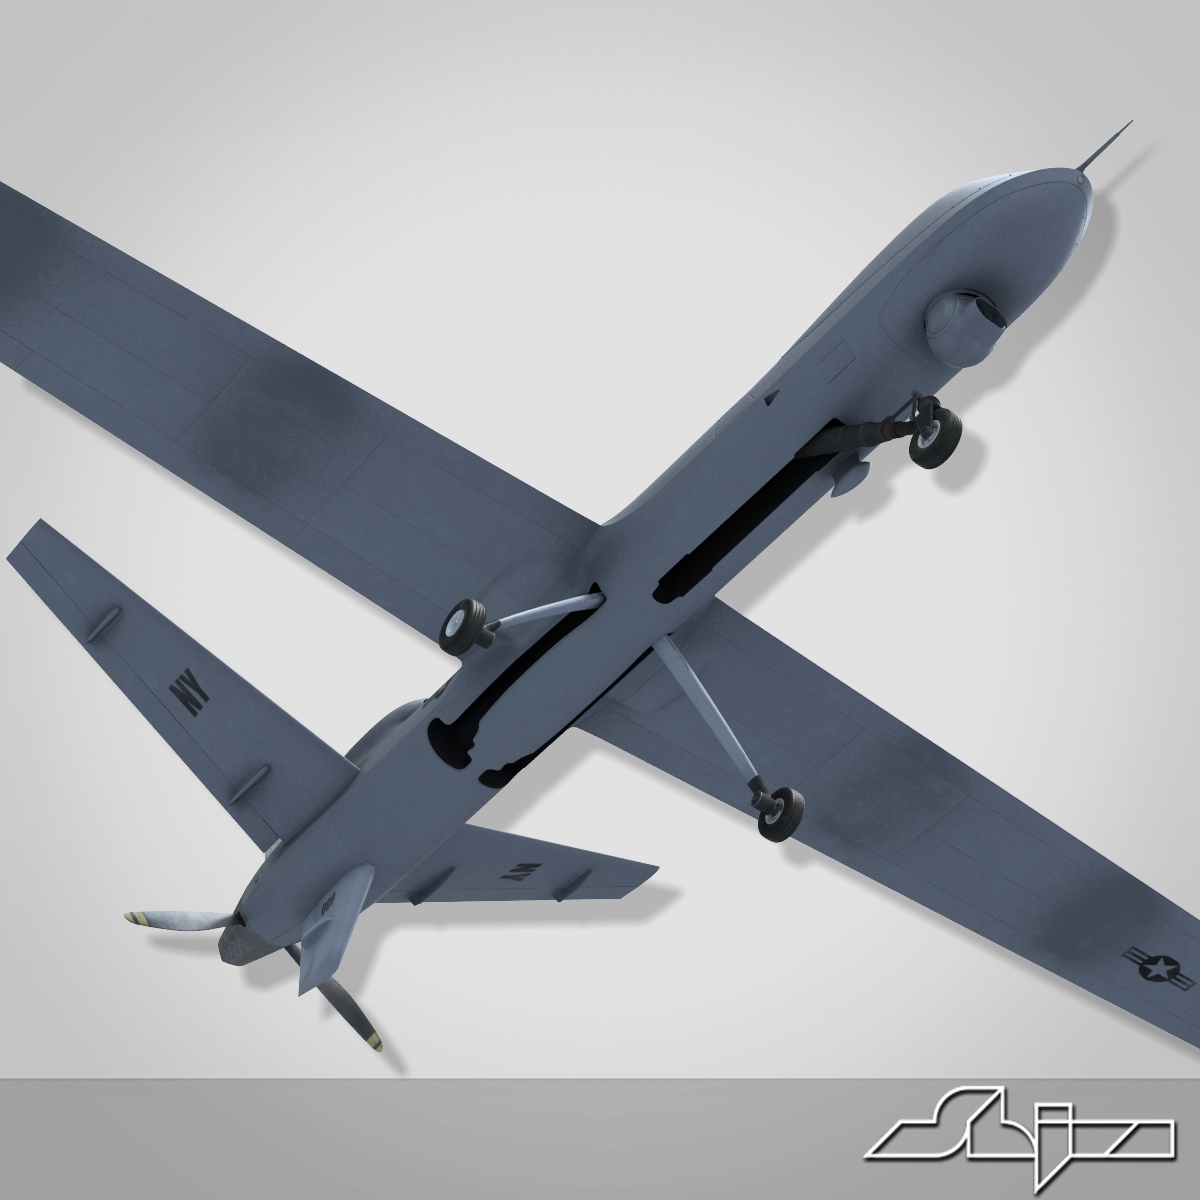 3d model of reaper unmanned vehicle 9